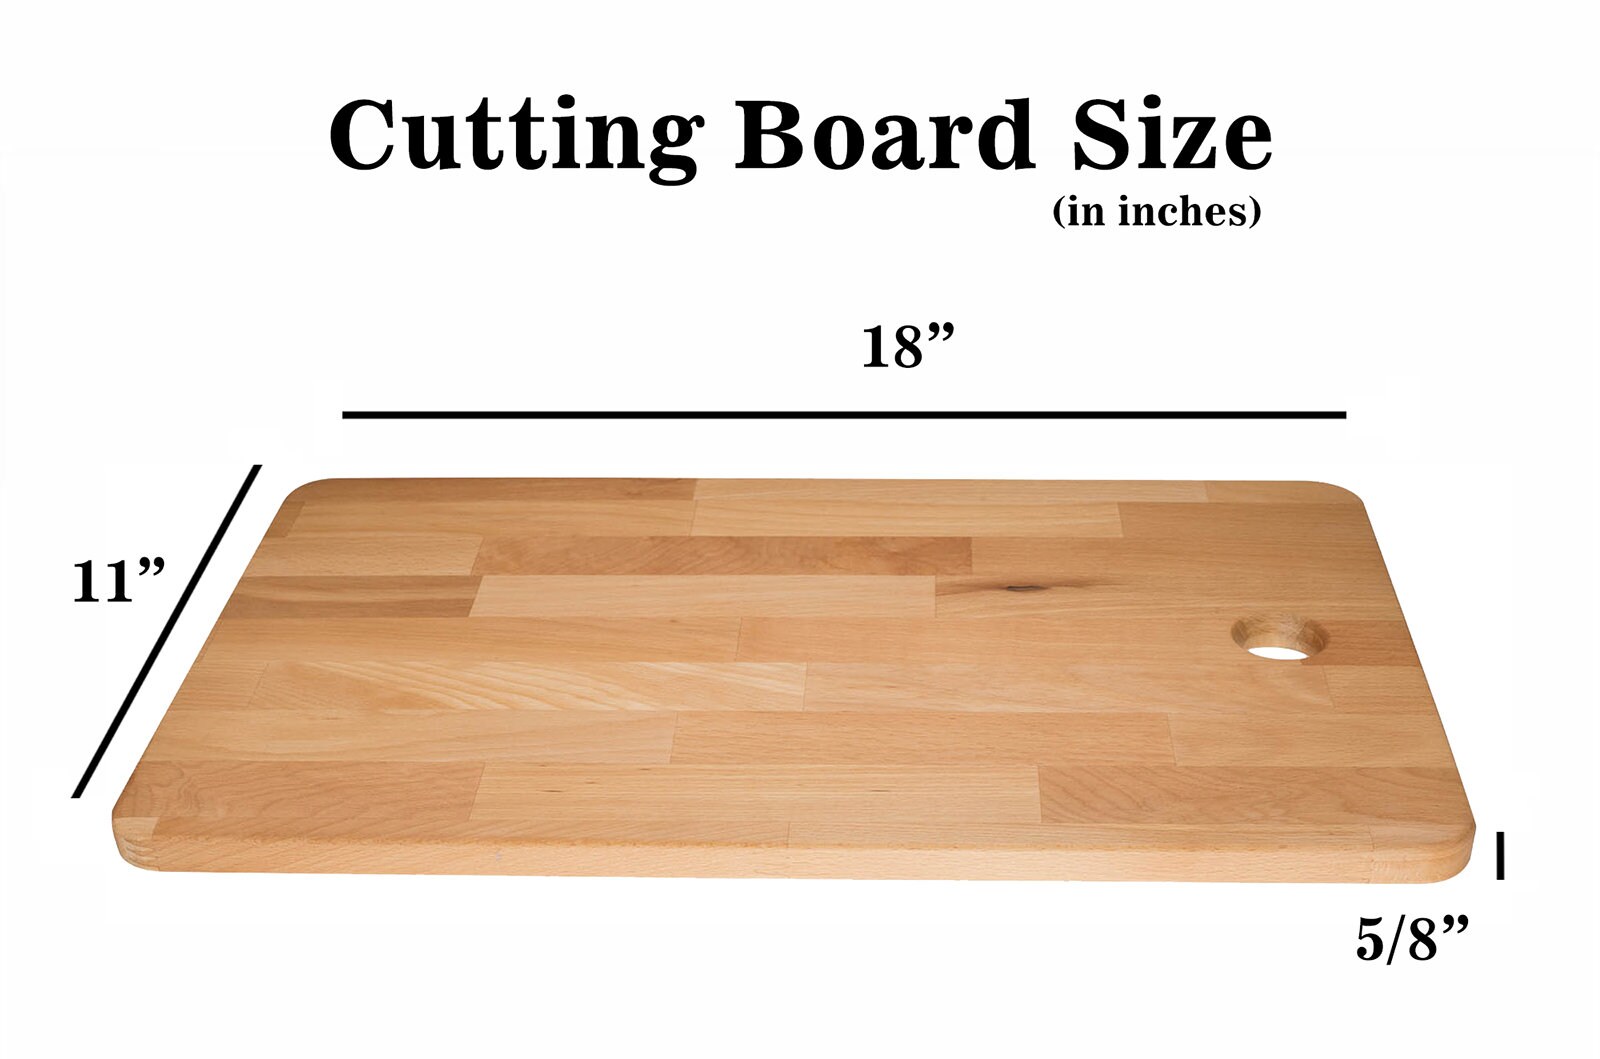 Makemepersonalised - One of our best selling products - solid chopping  boards perfect for any star wars fan!   board?ref=listings_manager_grid * * * #starwars #yoda #choppingboard